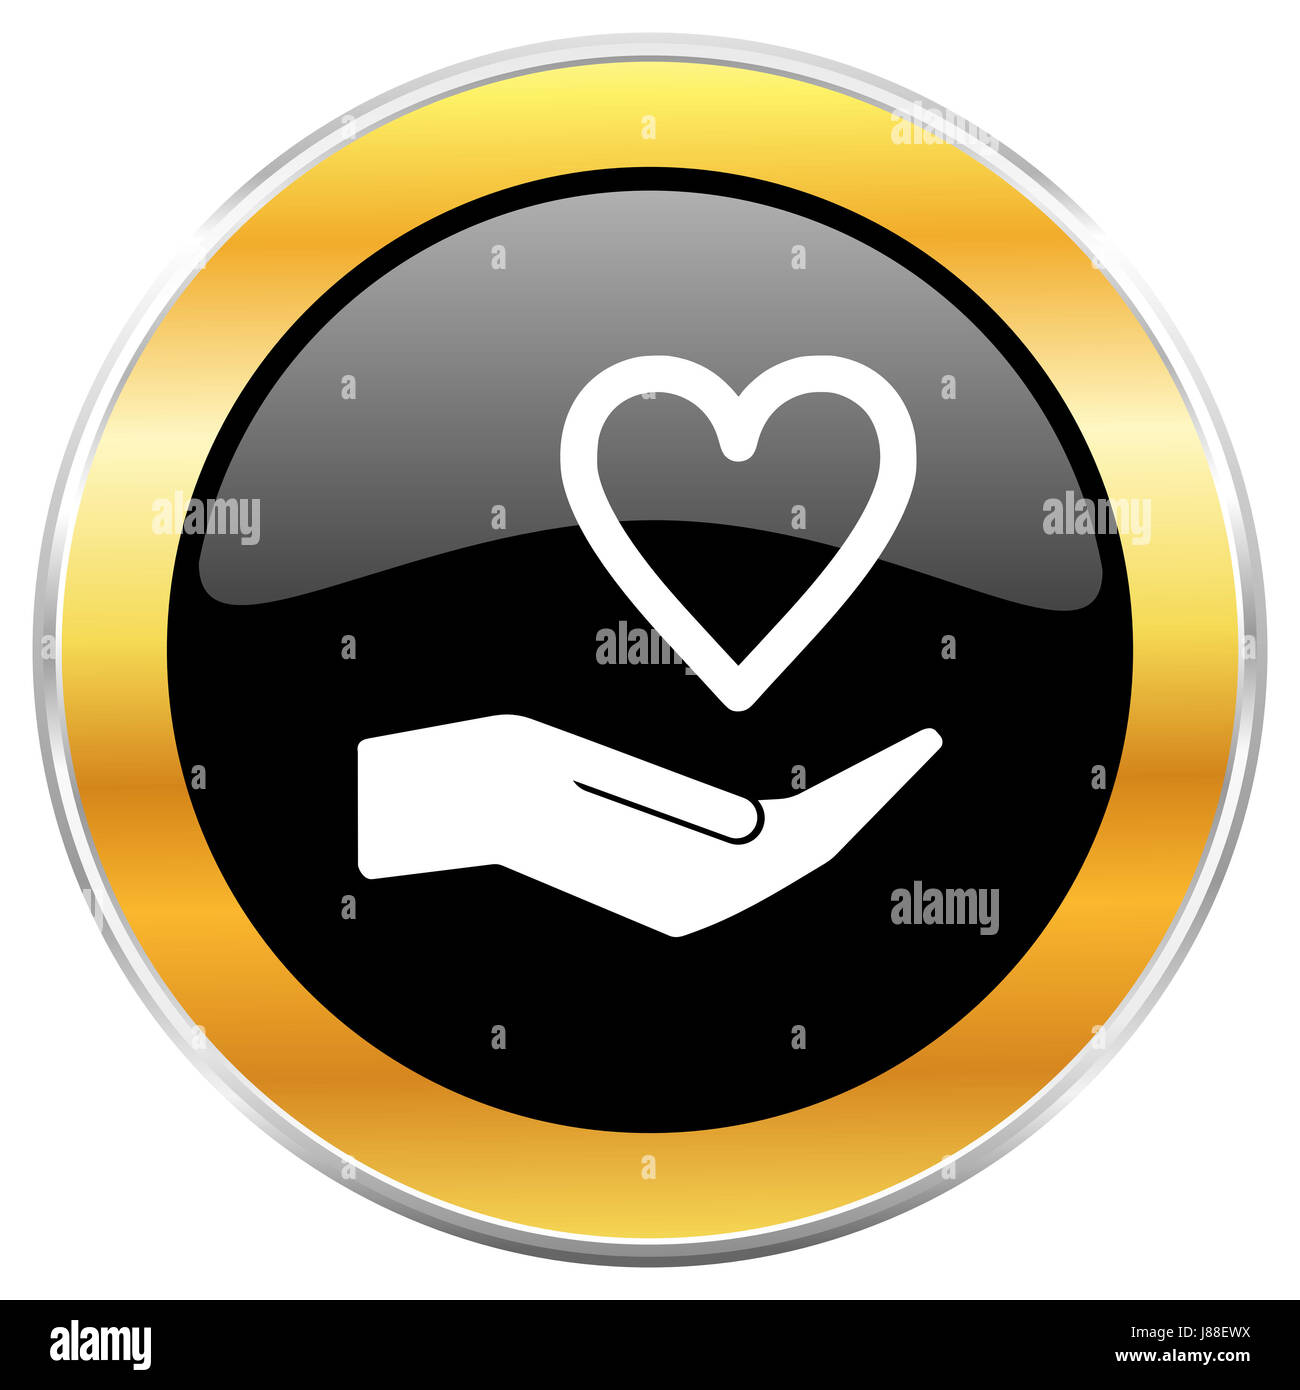 Care love black web icon with golden border isolated on white background. Round glossy button. Stock Photo